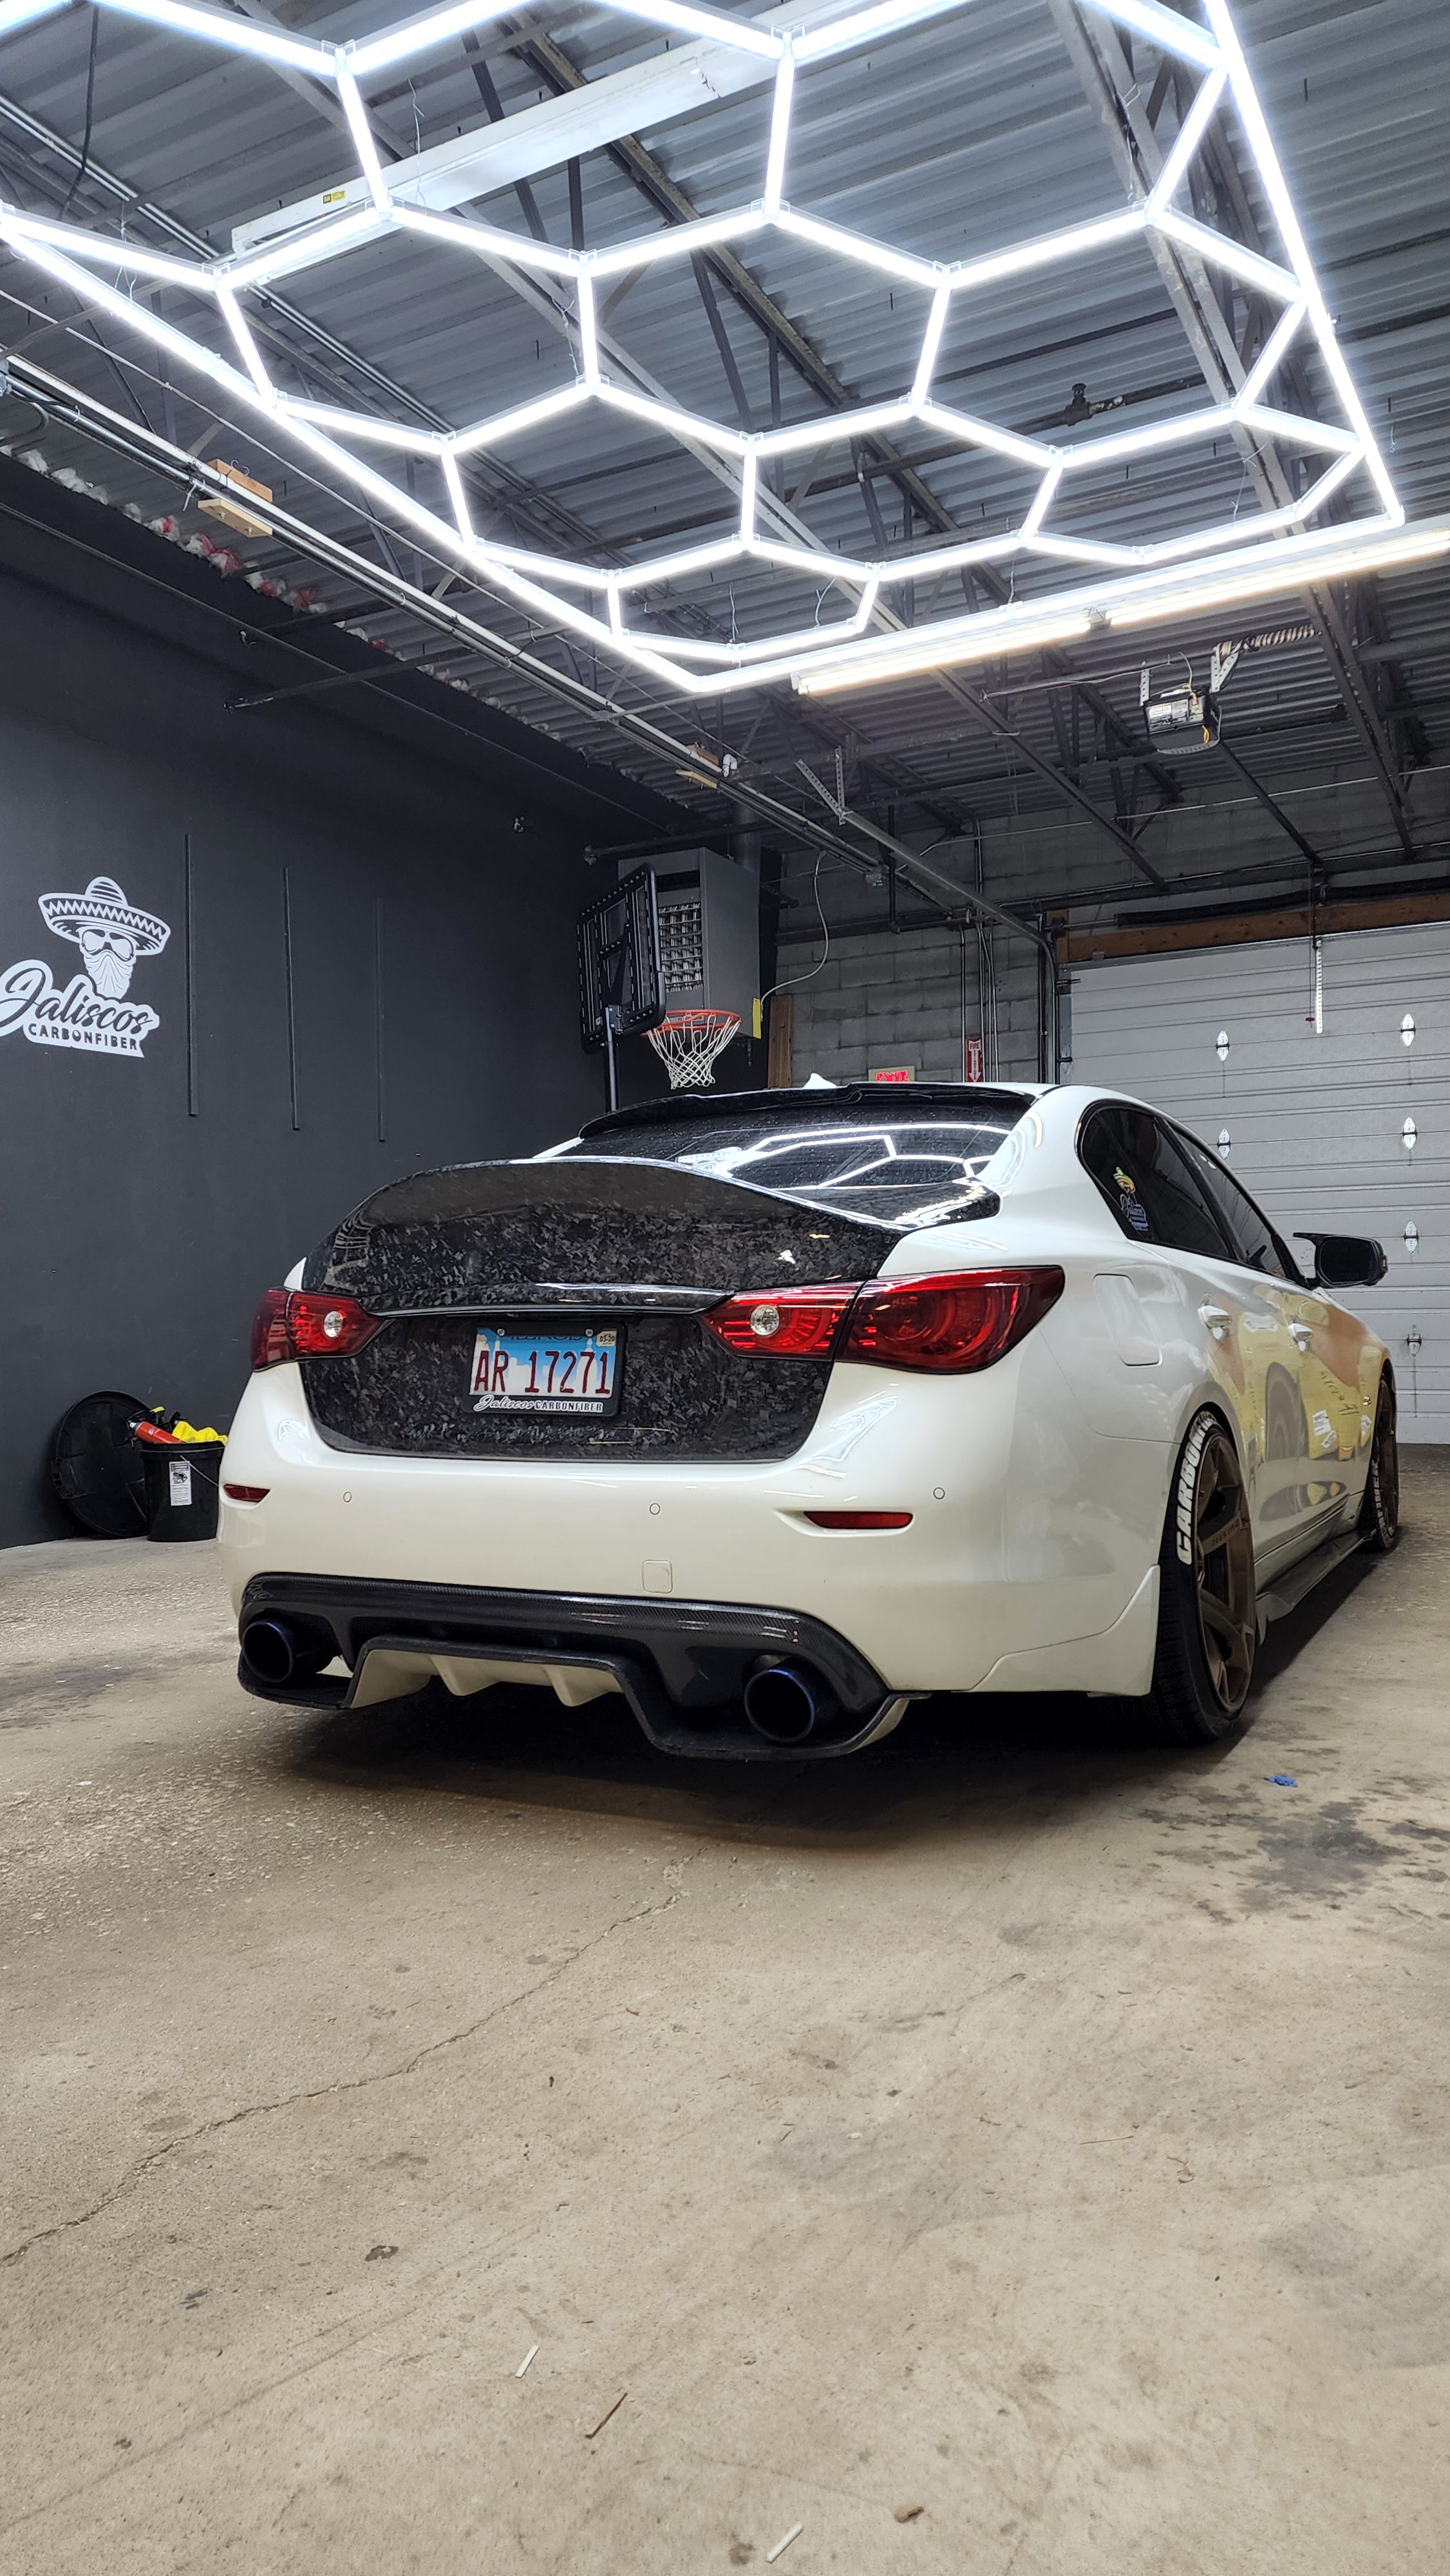 JCF Carbon Fiber Trunk on a white Infiniti Q50 seen from a low angle in a garage, highlighting the trunk's sporty aesthetic and the car's enhanced rear profile.